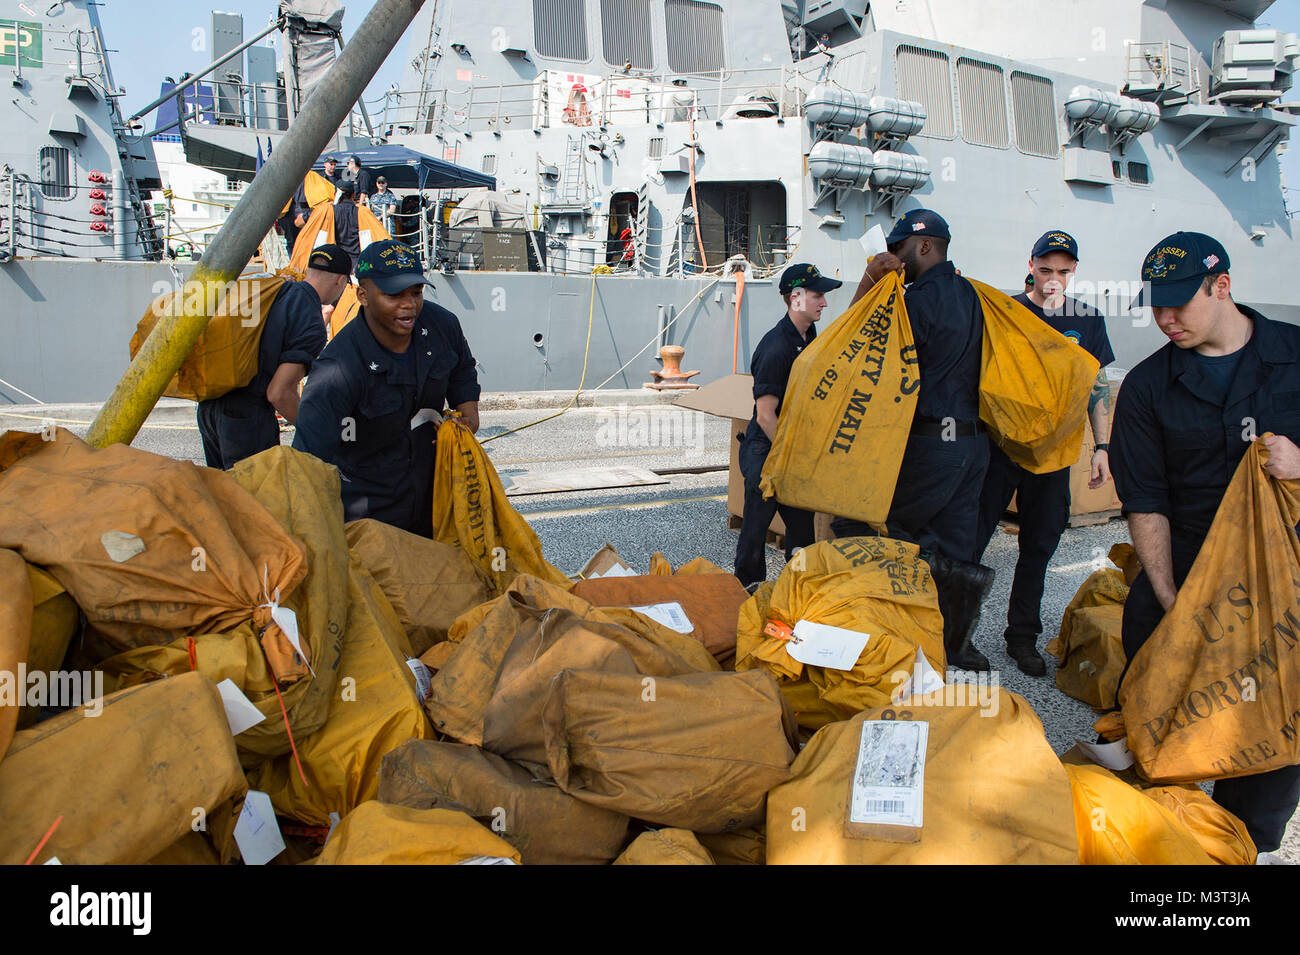 160413-N-MD297-027 ACAJUTLA, El Salvador (April 13, 2016) Sailors assigned to the Arleigh Burke-class guided-missile destroyer USS Lassen (DDG 82) carry more than 3,000 lbs. of mail onto the ship during a brief stop for fuel (BSF) in Acajutla, El Salvador. Lassen is currently underway in support of Operation Martillo, a joint operation with the U.S. Coast Guard and partner nations within the 4th Fleet area of responsibility. Operation Martillo is being led by Joint Interagency Task Force South, in support of U.S. Southern Command. (U.S. Navy photo by Mass Communication Specialist 2nd Class Hue Stock Photo